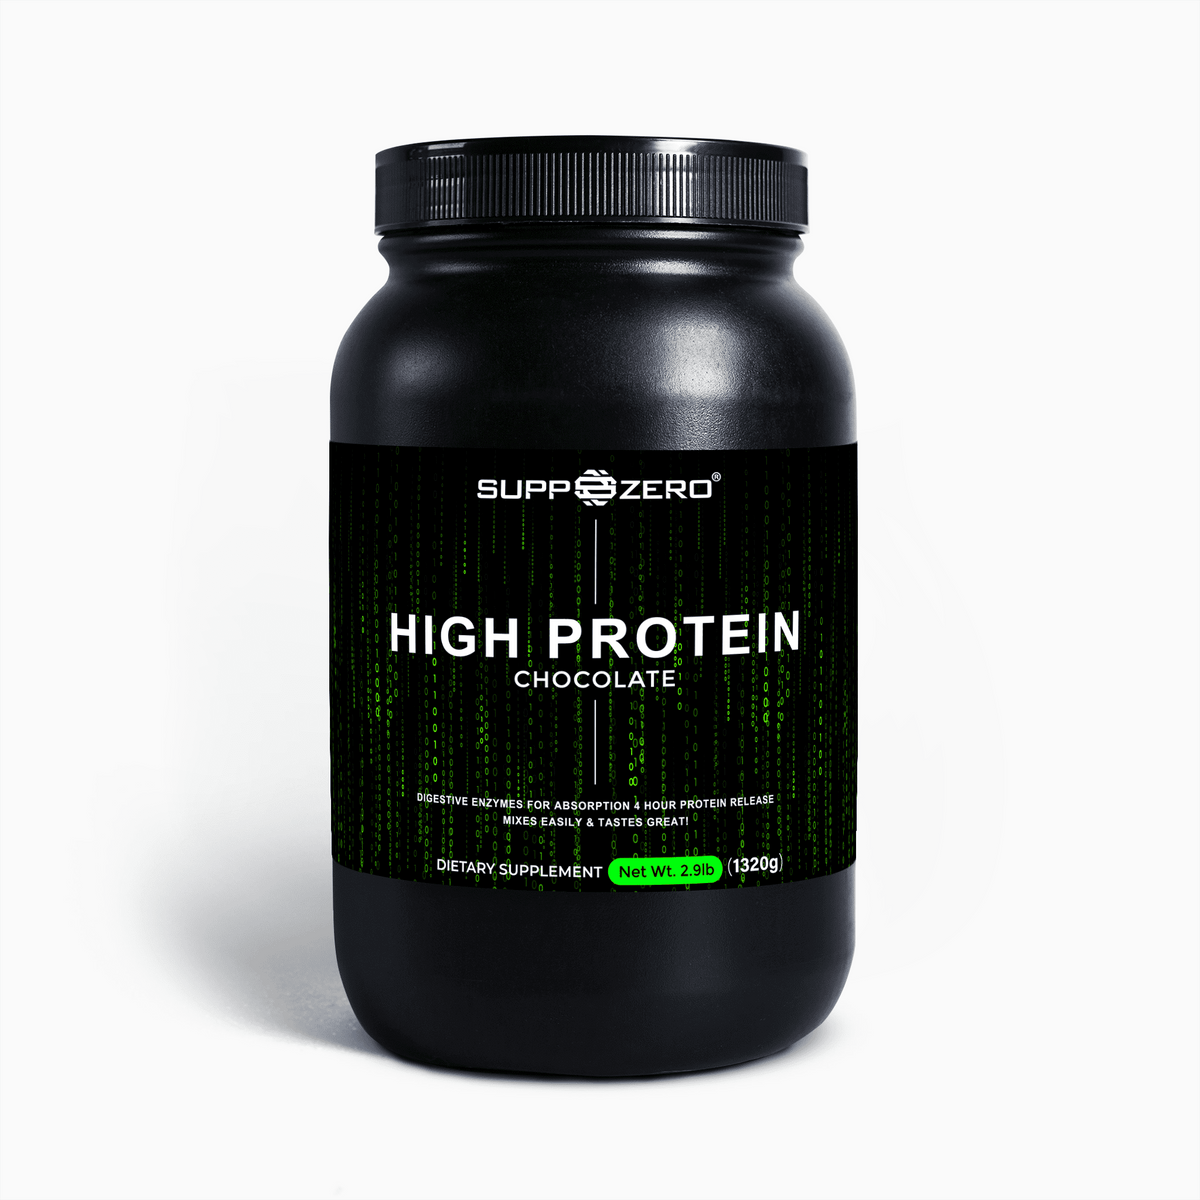 HIGH PROTEIN (CHOCOLATE)